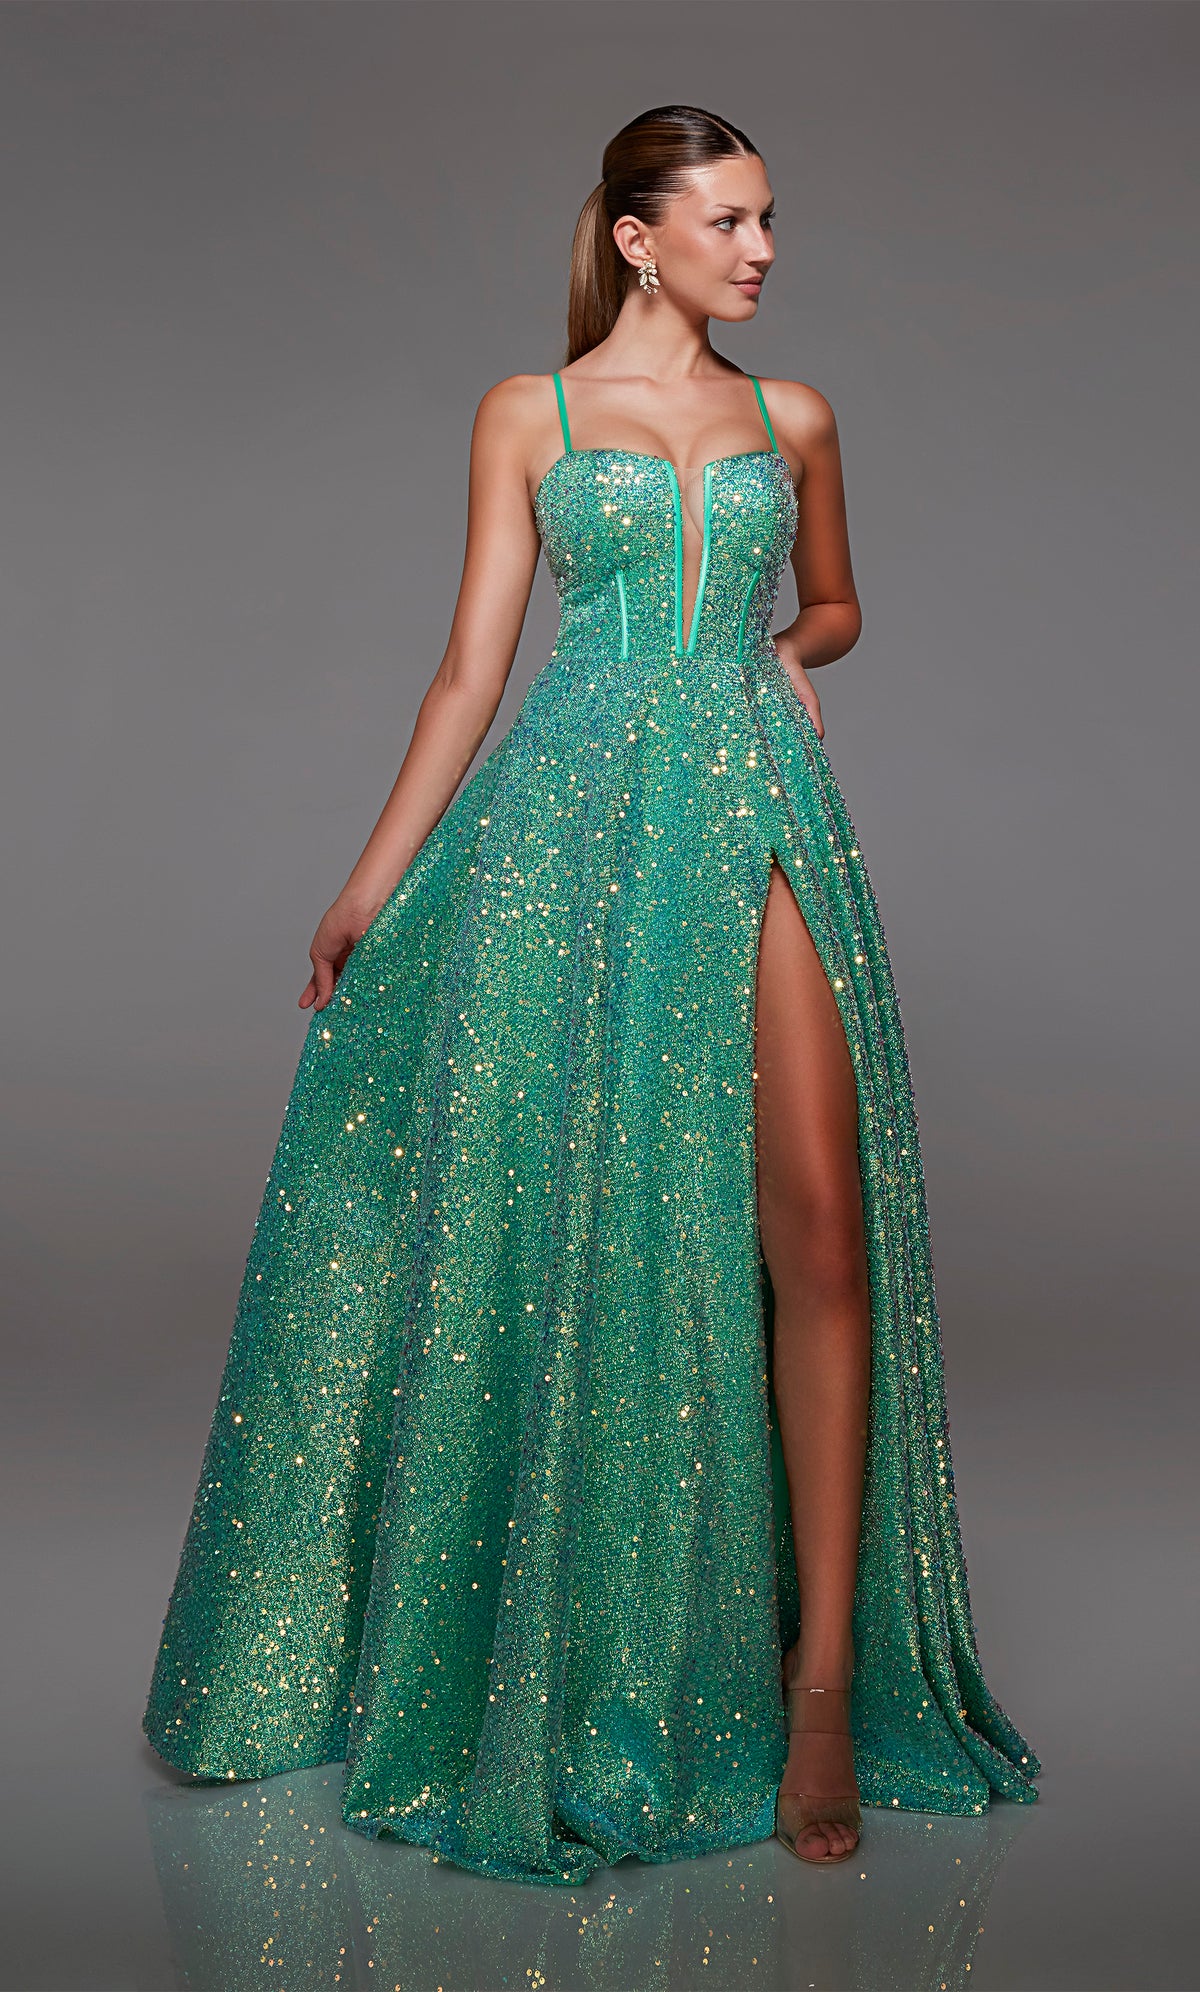 Emerald green prom dress: Plunging corset bodice, high slit, lace-up back, crafted in gorgeous iridescent sequins for an captivating and stylish ensemble.